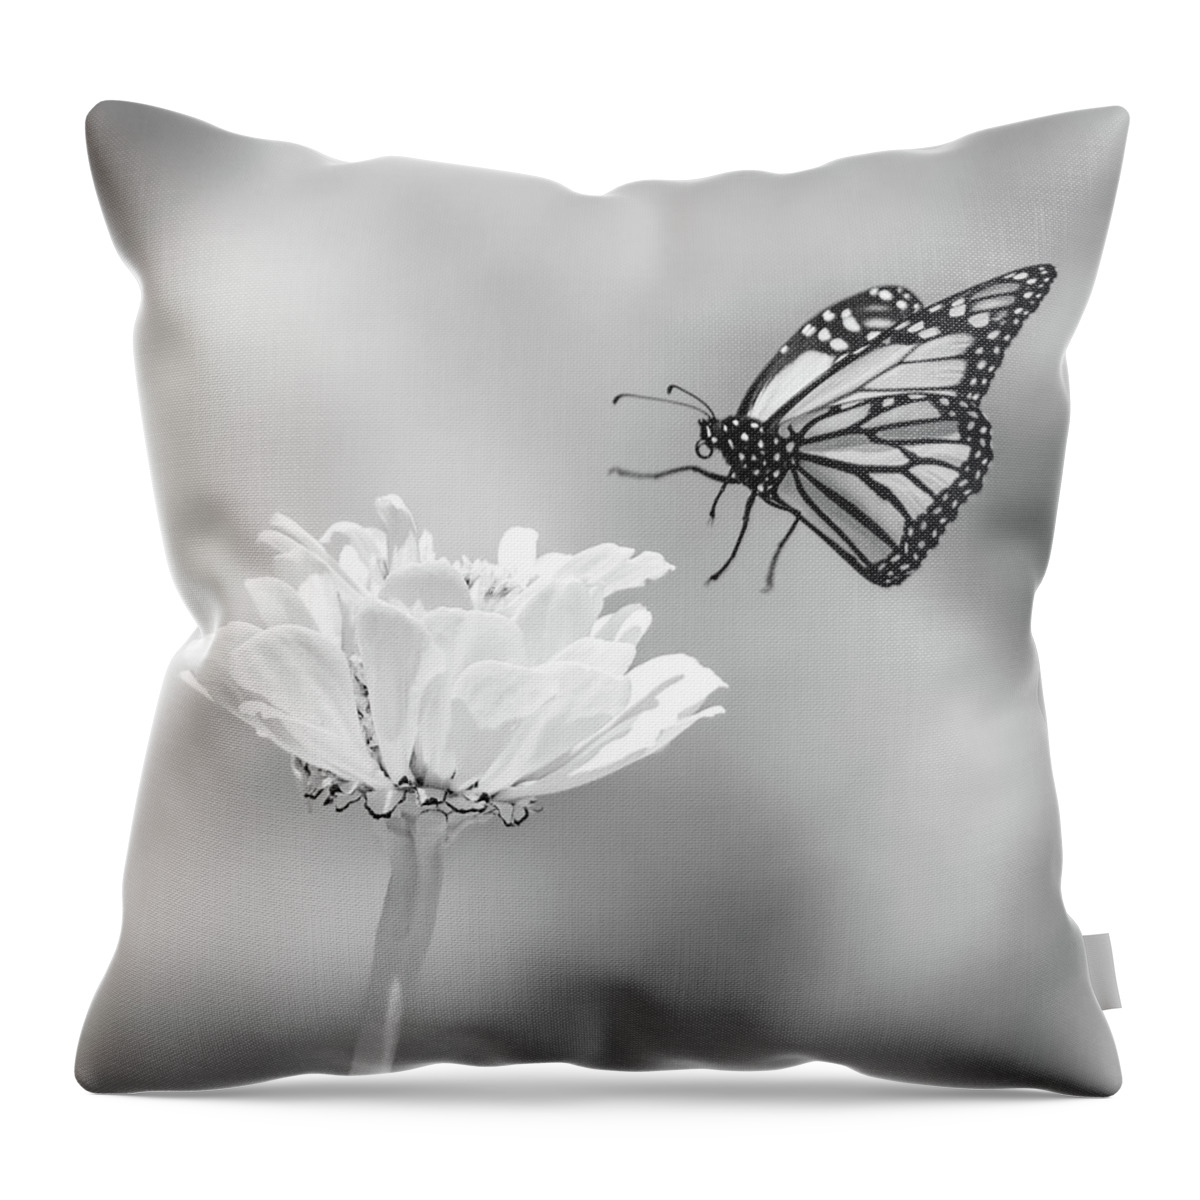 Ir Infra Red Infrared Monarch Landing Flying Flight Butterfly Butterflies Flower Flowers Floral Botany Botanical Outside Outdoors Nature Natural Insect Ma Mass Massachusetts U.s.a. Brian Hale Brianhalephoto Fine Art 720nm Throw Pillow featuring the photograph Monarch in Infrared 6 by Brian Hale